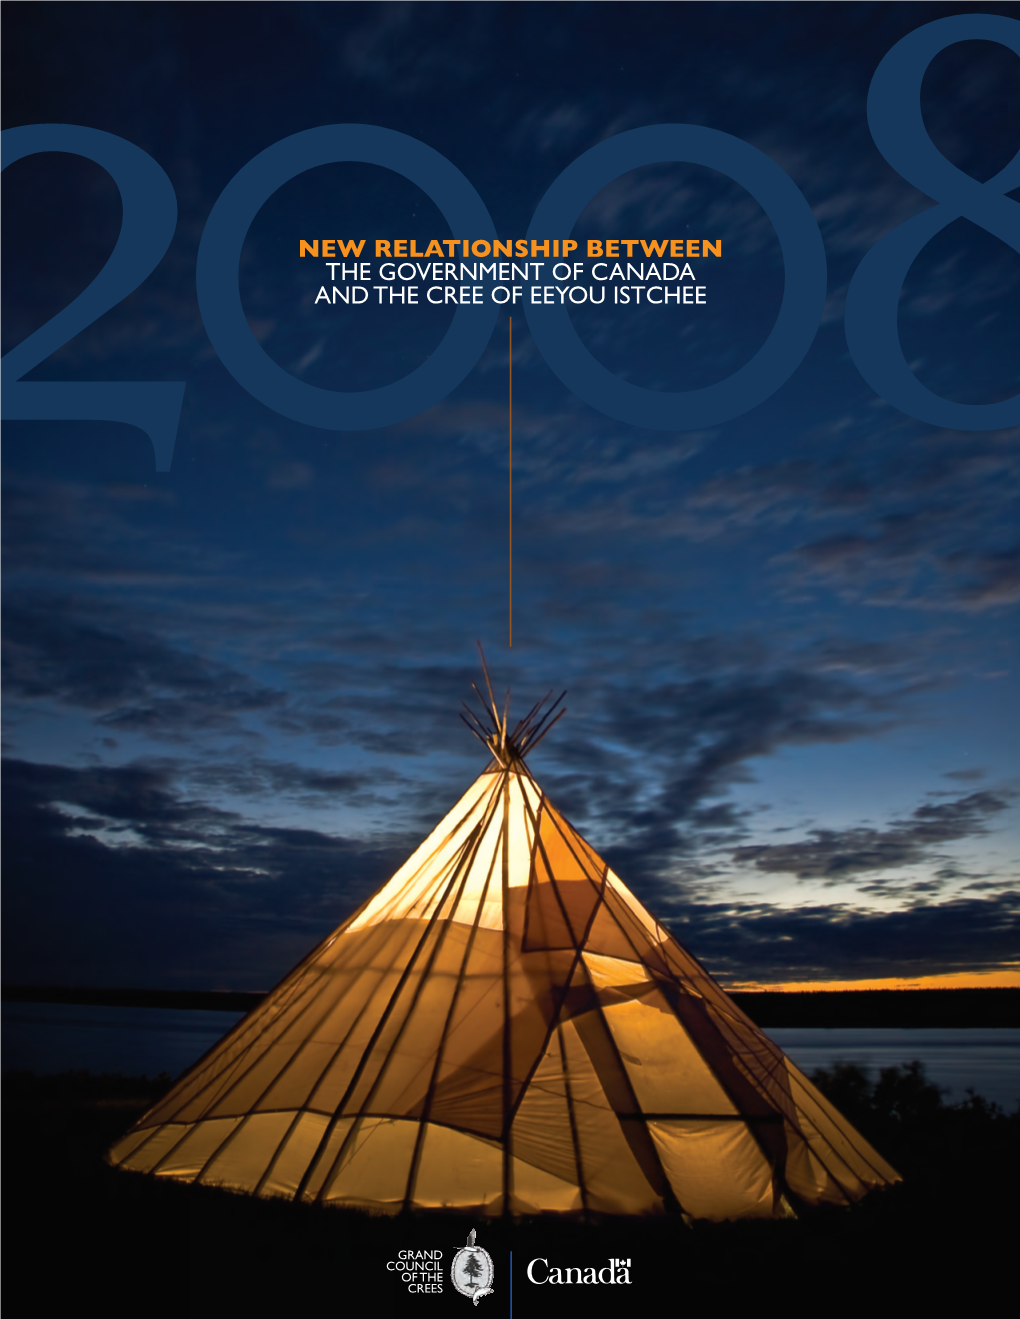 New Relationship Between the Government of Canada 2008And the Cree of Eeyou Istchee